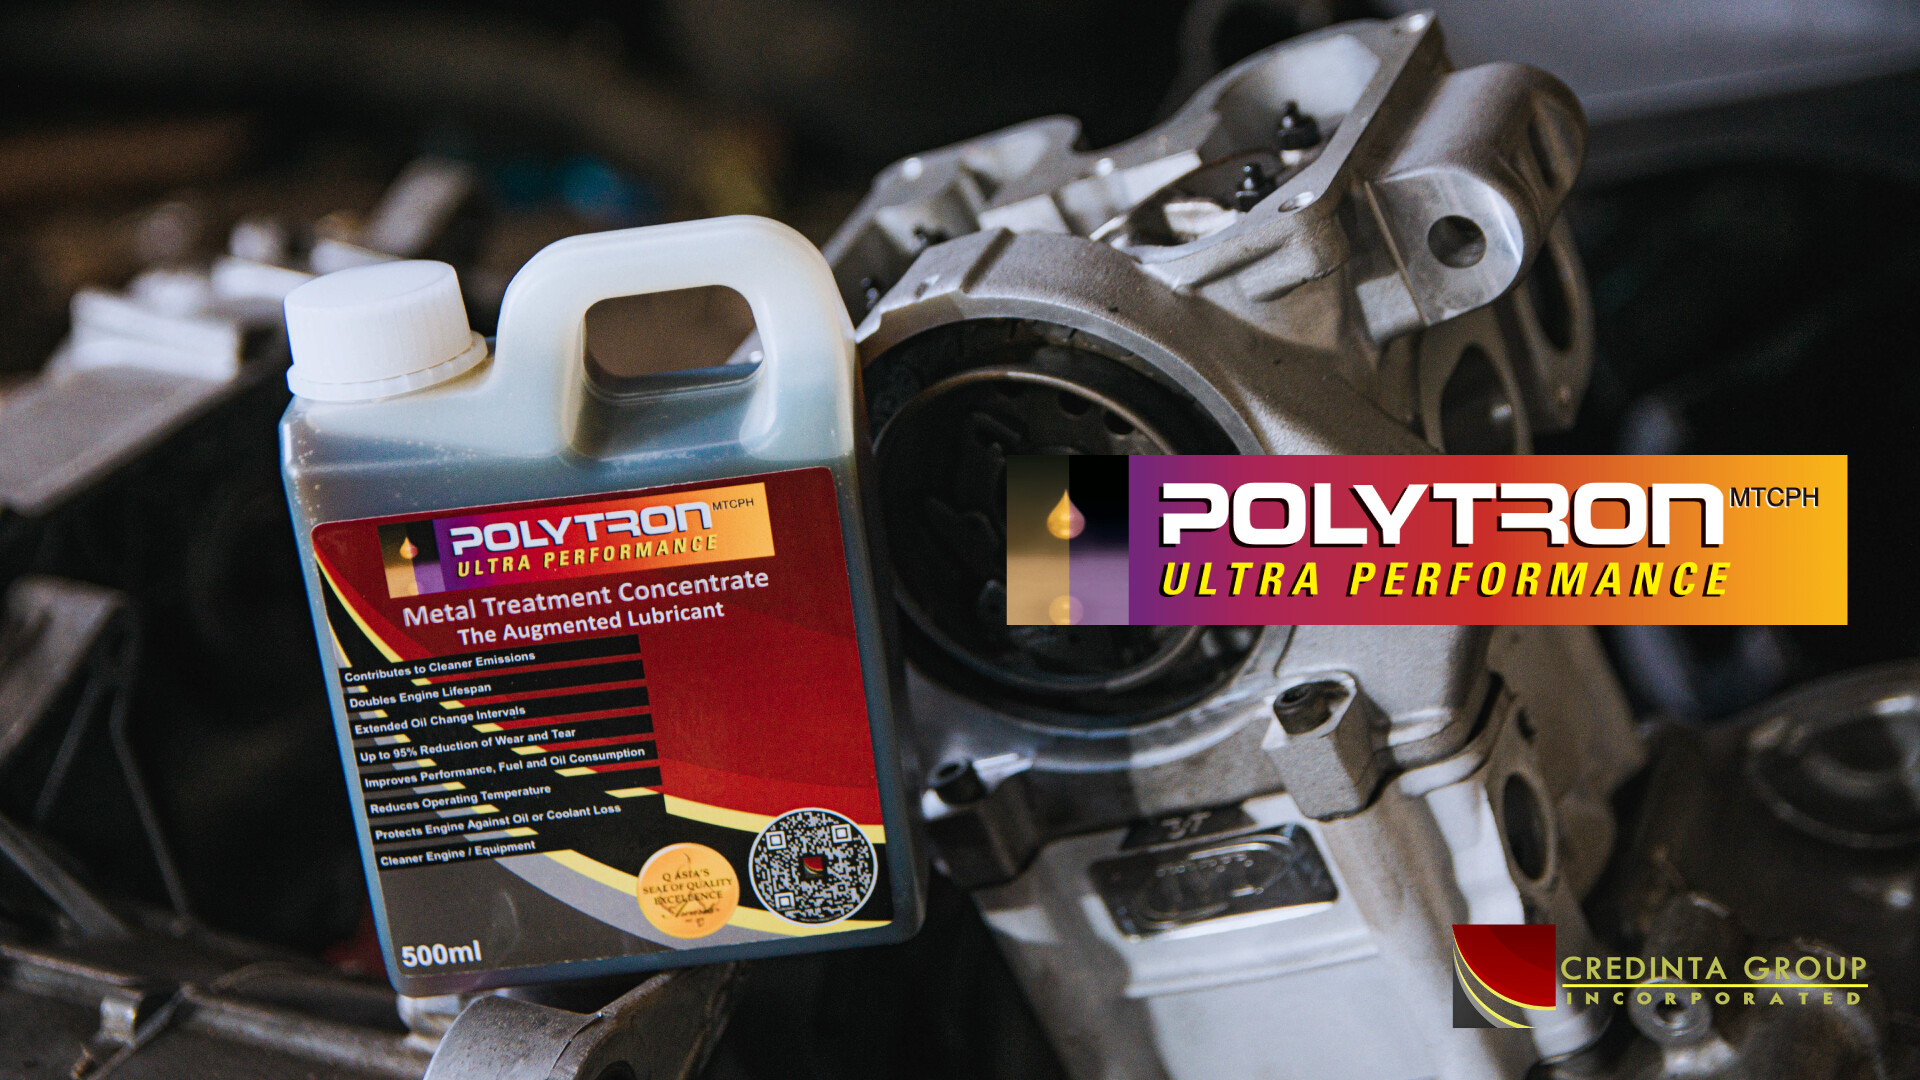 Enhancing Performance and Extending Equipment Life with POLYTRON Metal Treatment Concentrate (MTC)